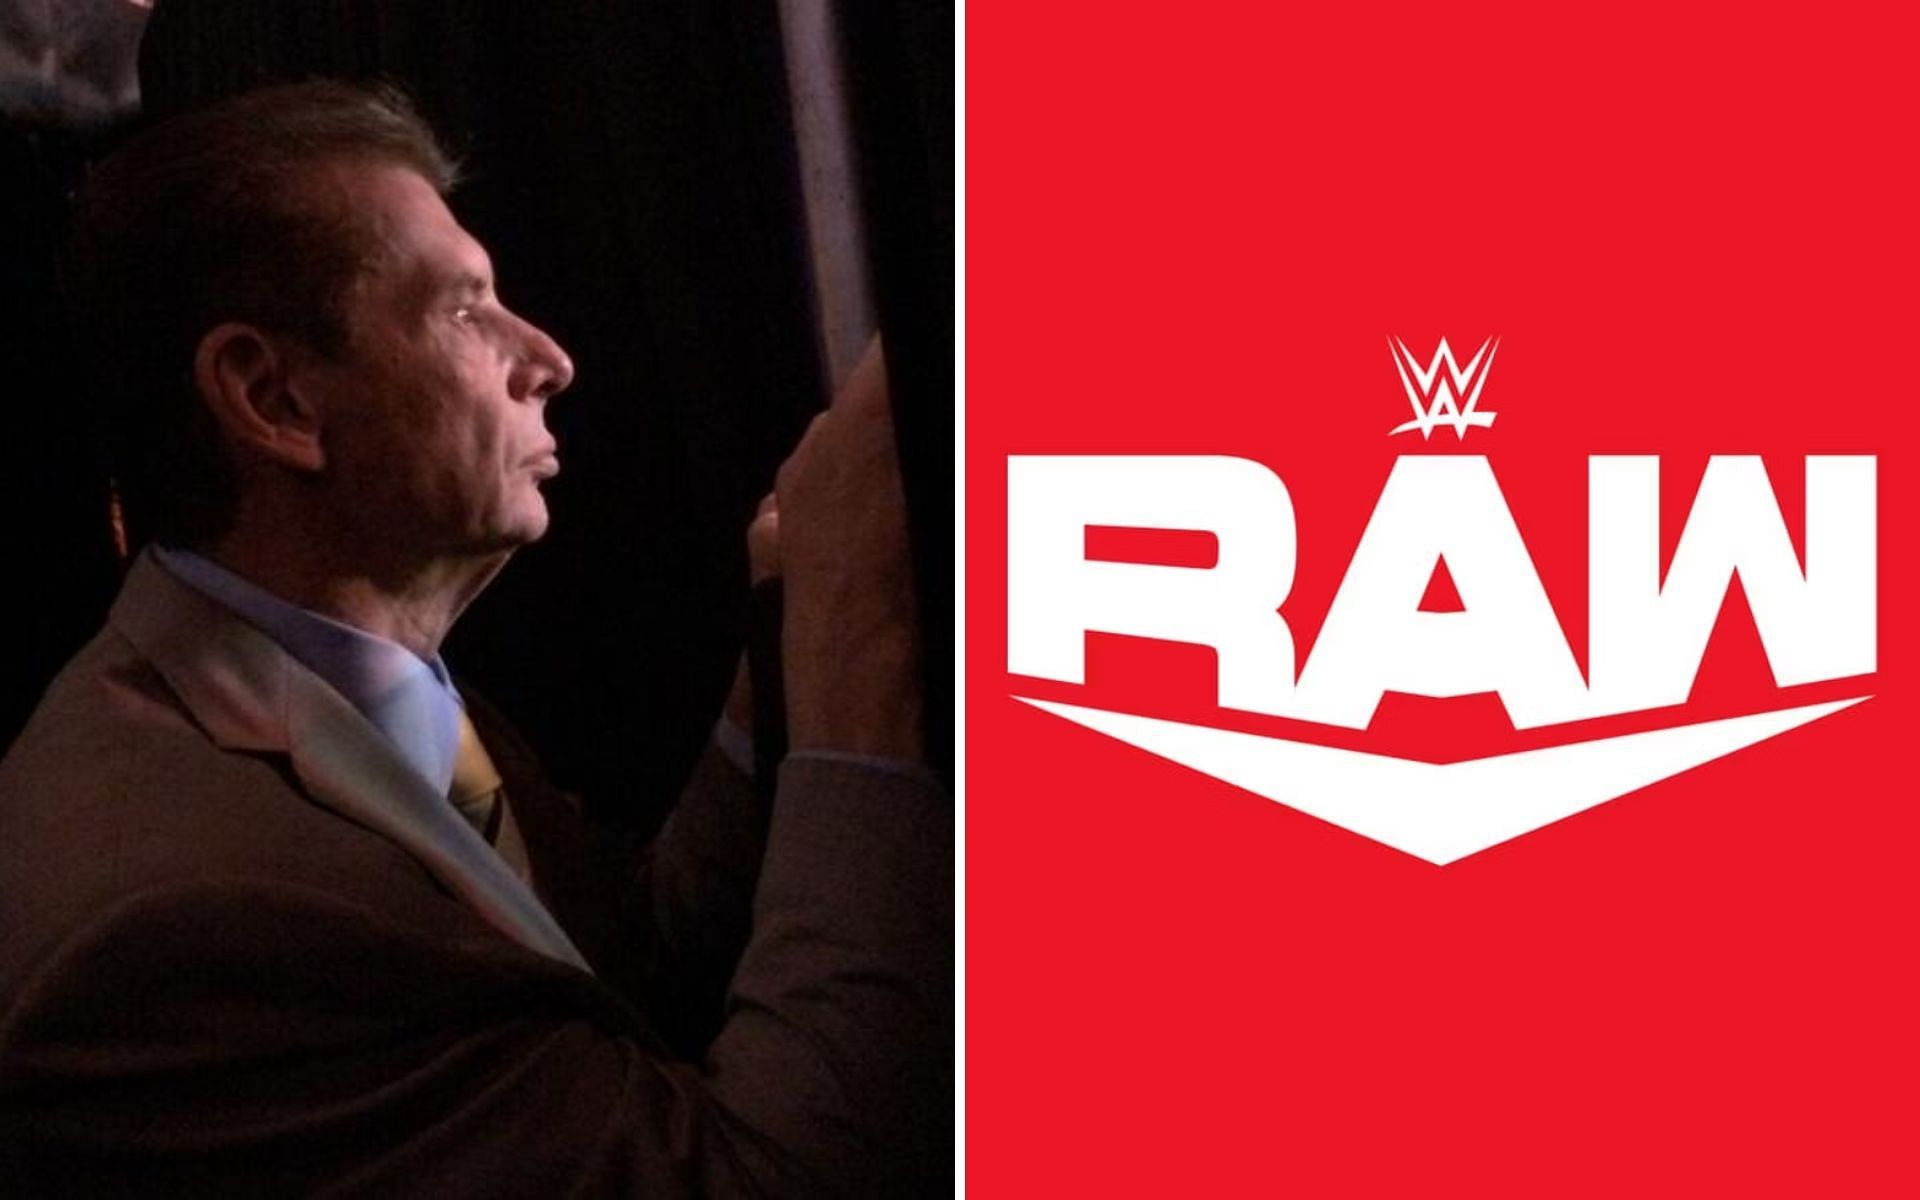 What did Vince McMahon tell the top RAW star